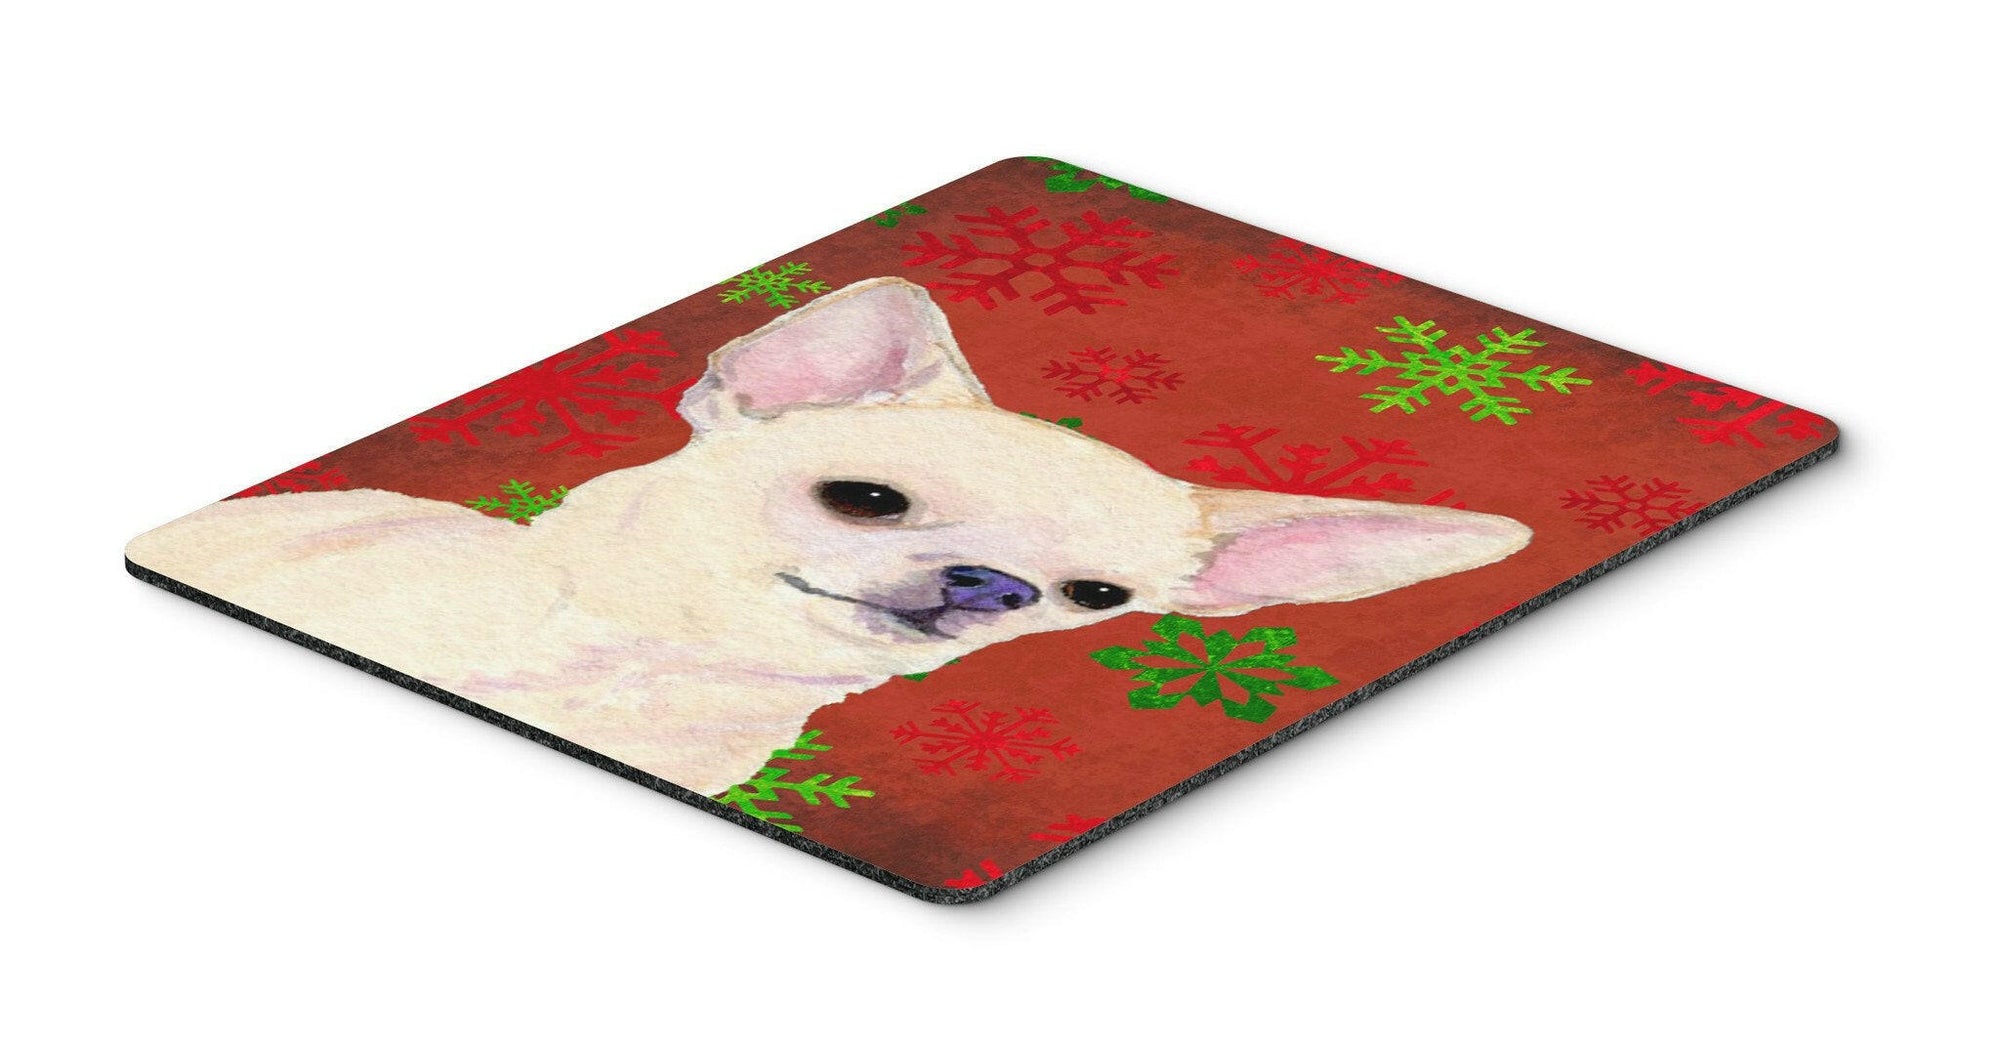 Chihuahua Red and Green Snowflakes Christmas Mouse Pad, Hot Pad or Trivet by Caroline's Treasures